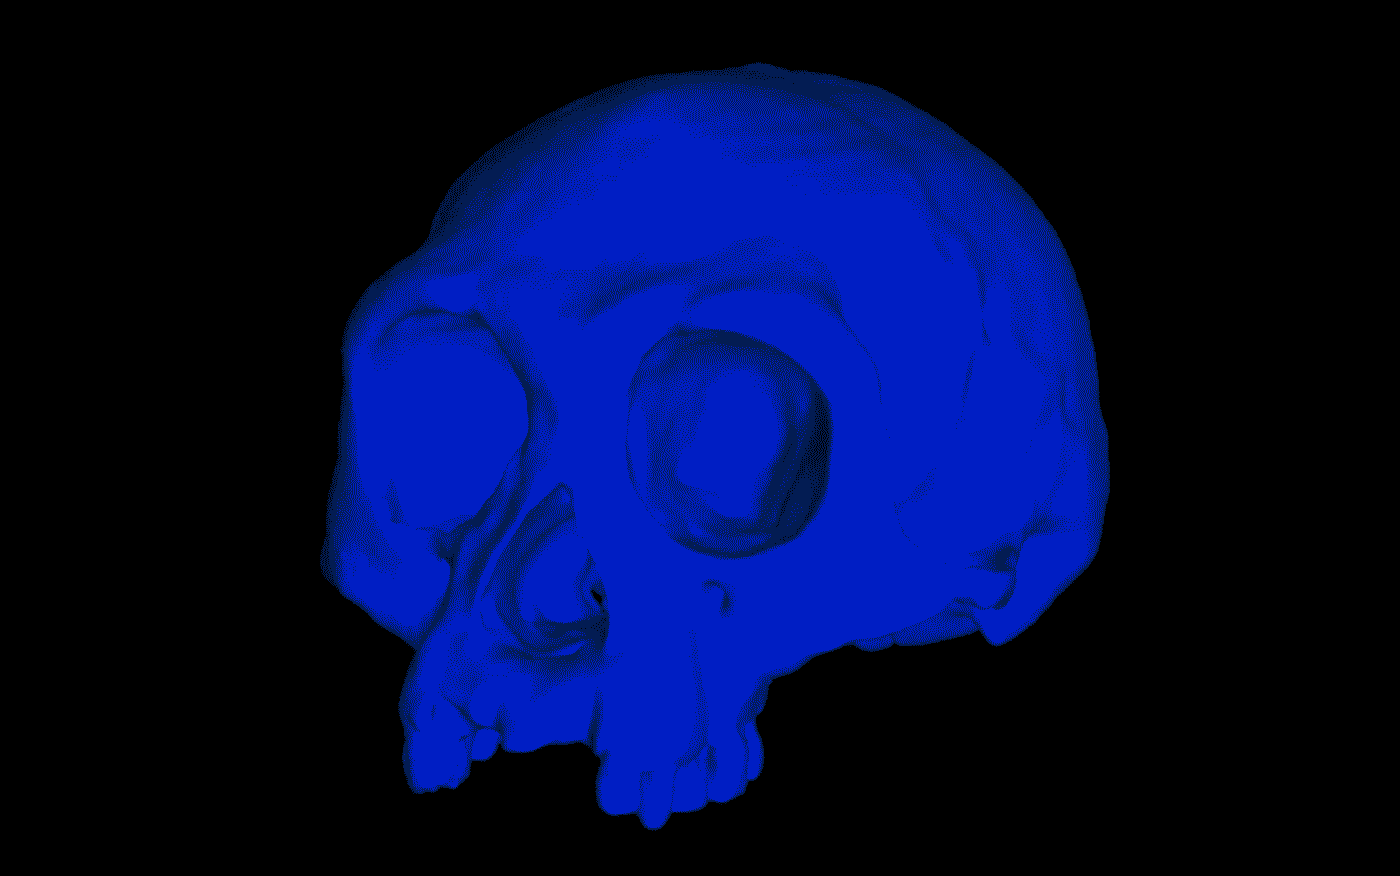 A computer simulation of a Homo floresiensis cranium shows the pattern of stress and strain in the bones of the face during biting. Areas under high strain are shown in white, pink and red. Credit: Ledogar lab, Duke University